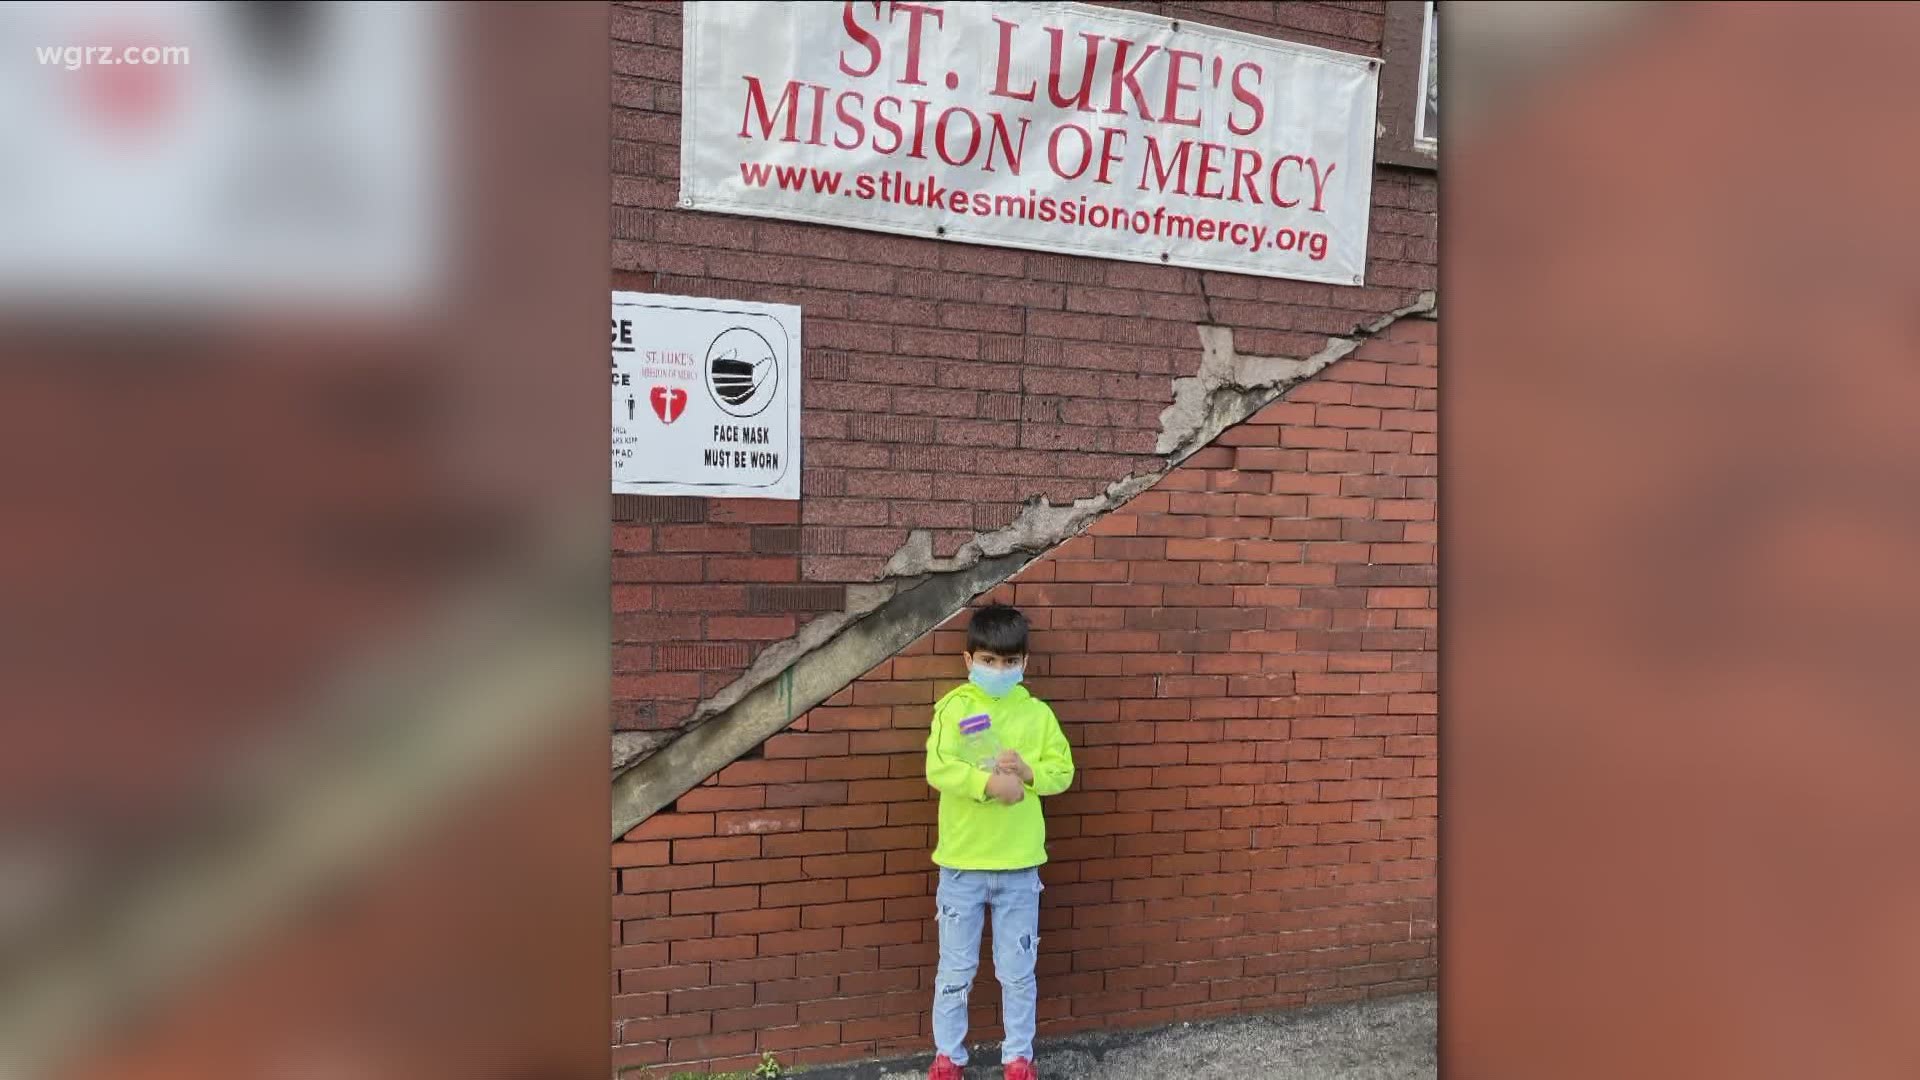 When 6-yr-old Ayaan Arshad's parents said they were donating items to St. Luke's Mission of Mercy, he ran to car with his jar of money so he could donate, too.